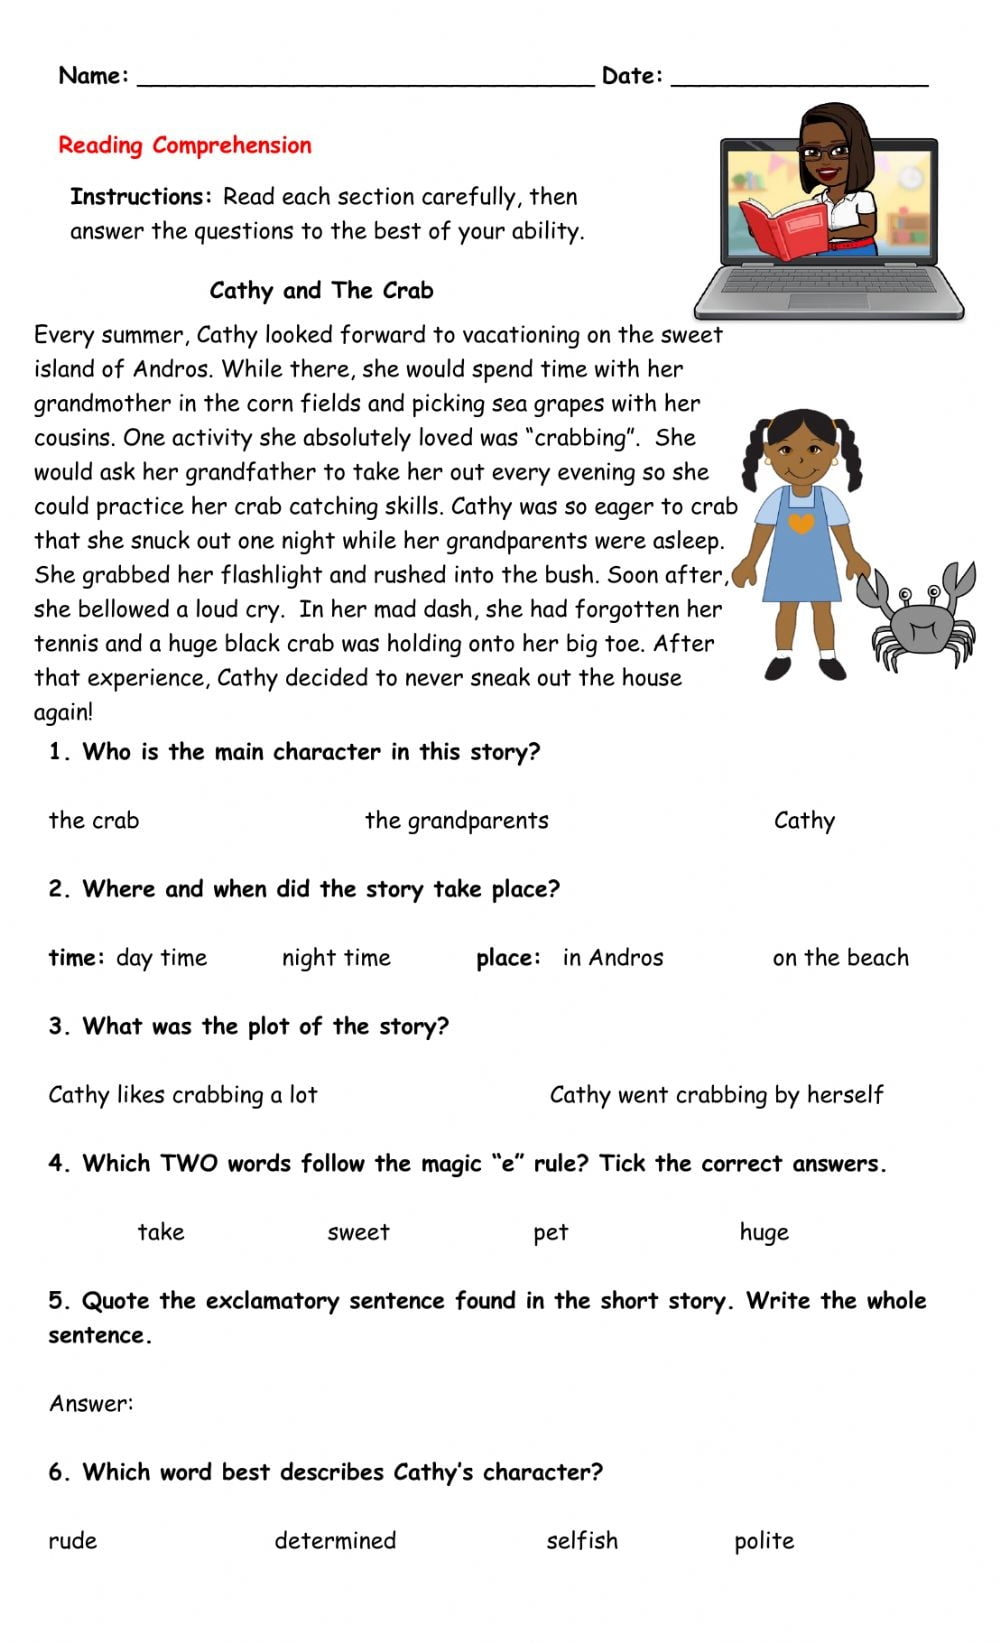 Reading Comprehension Online Exercise For 4